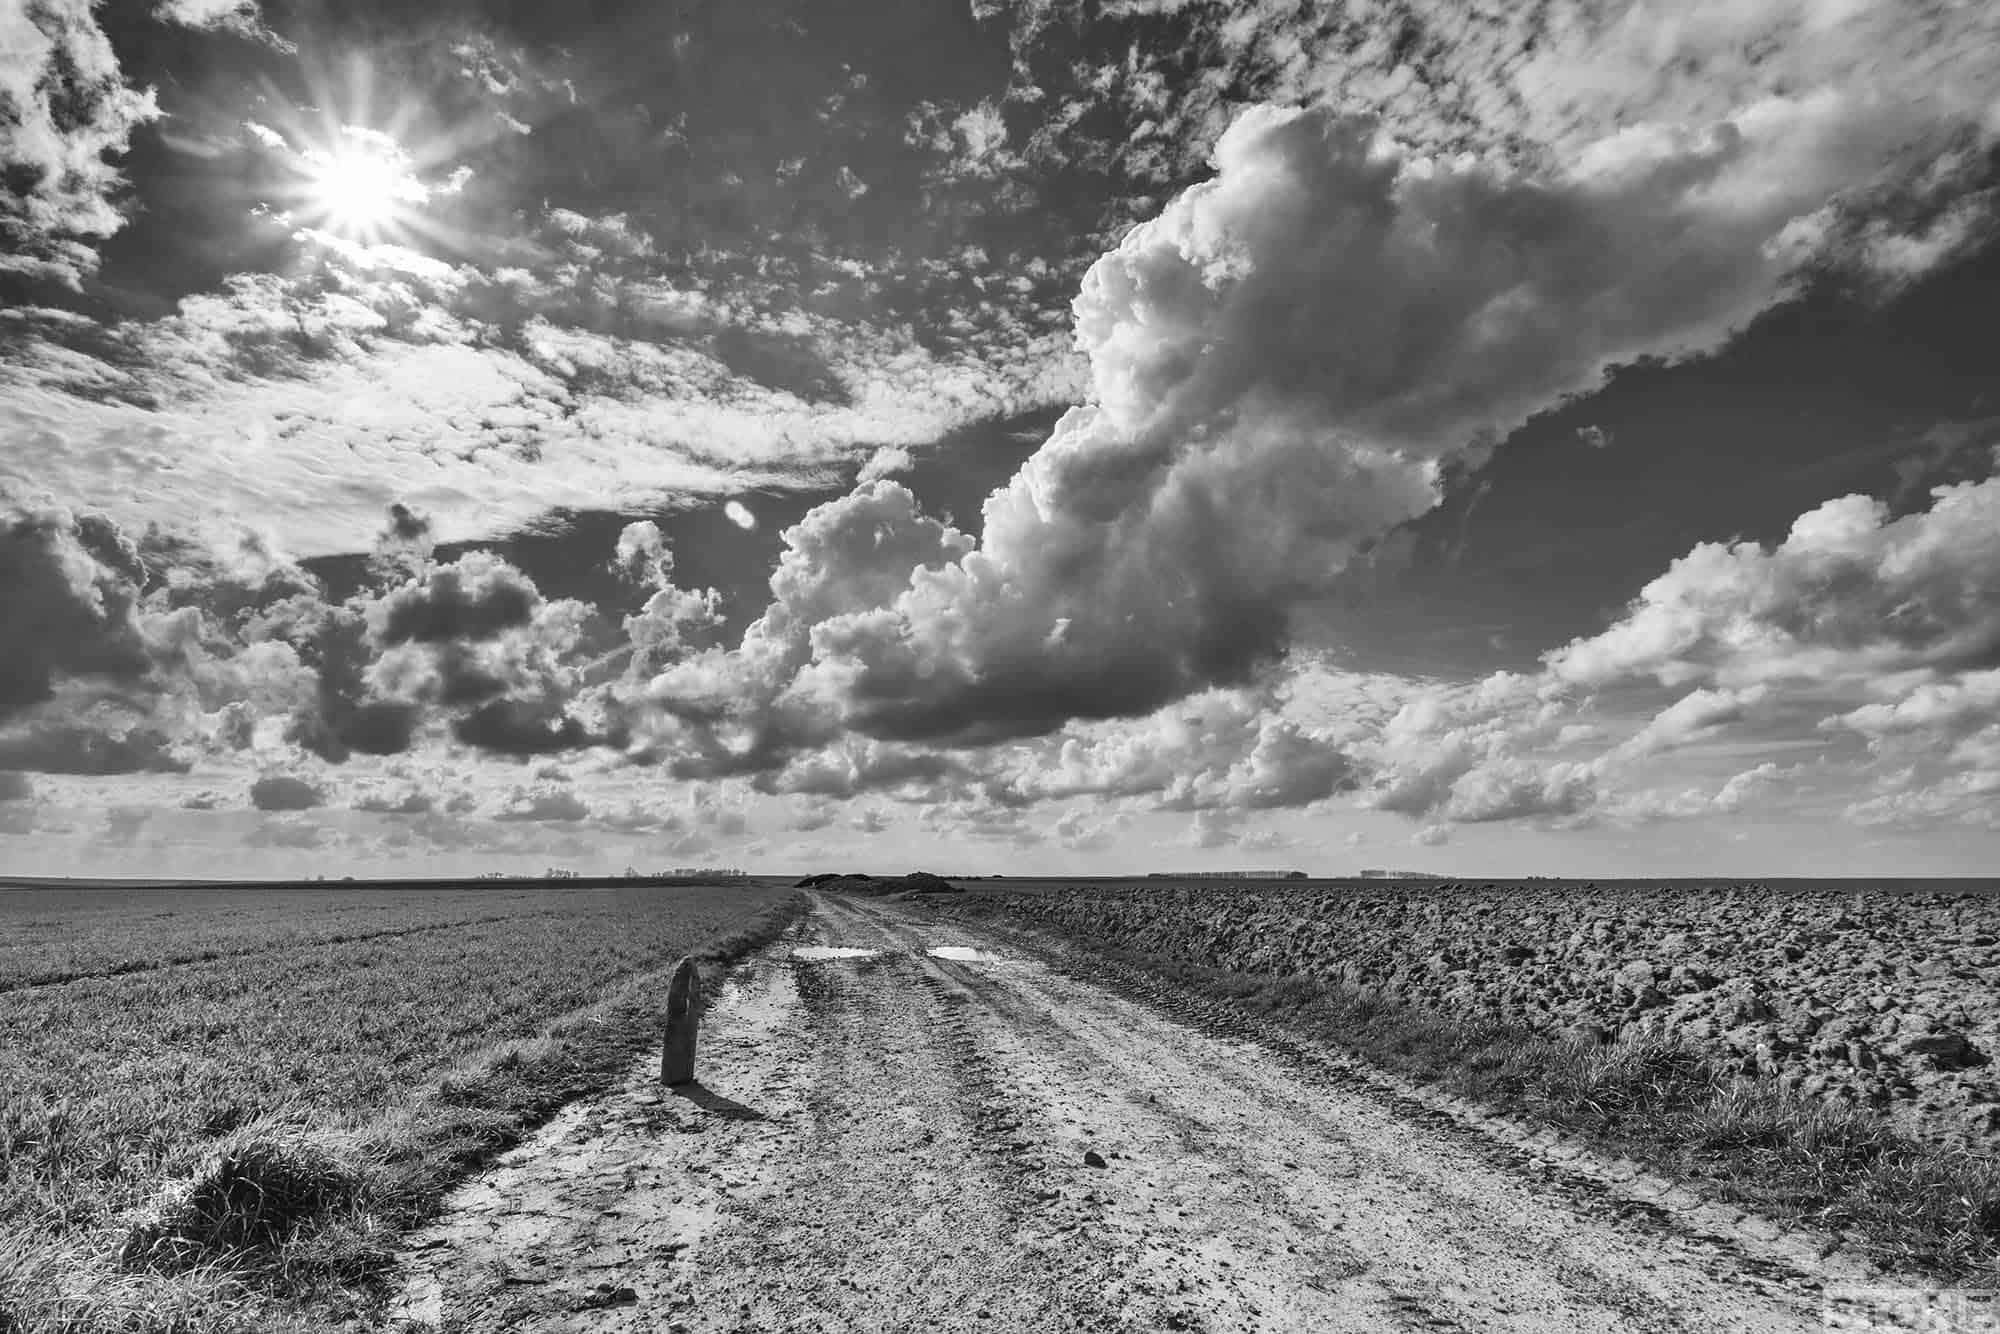 Vanishing point: Courcelette